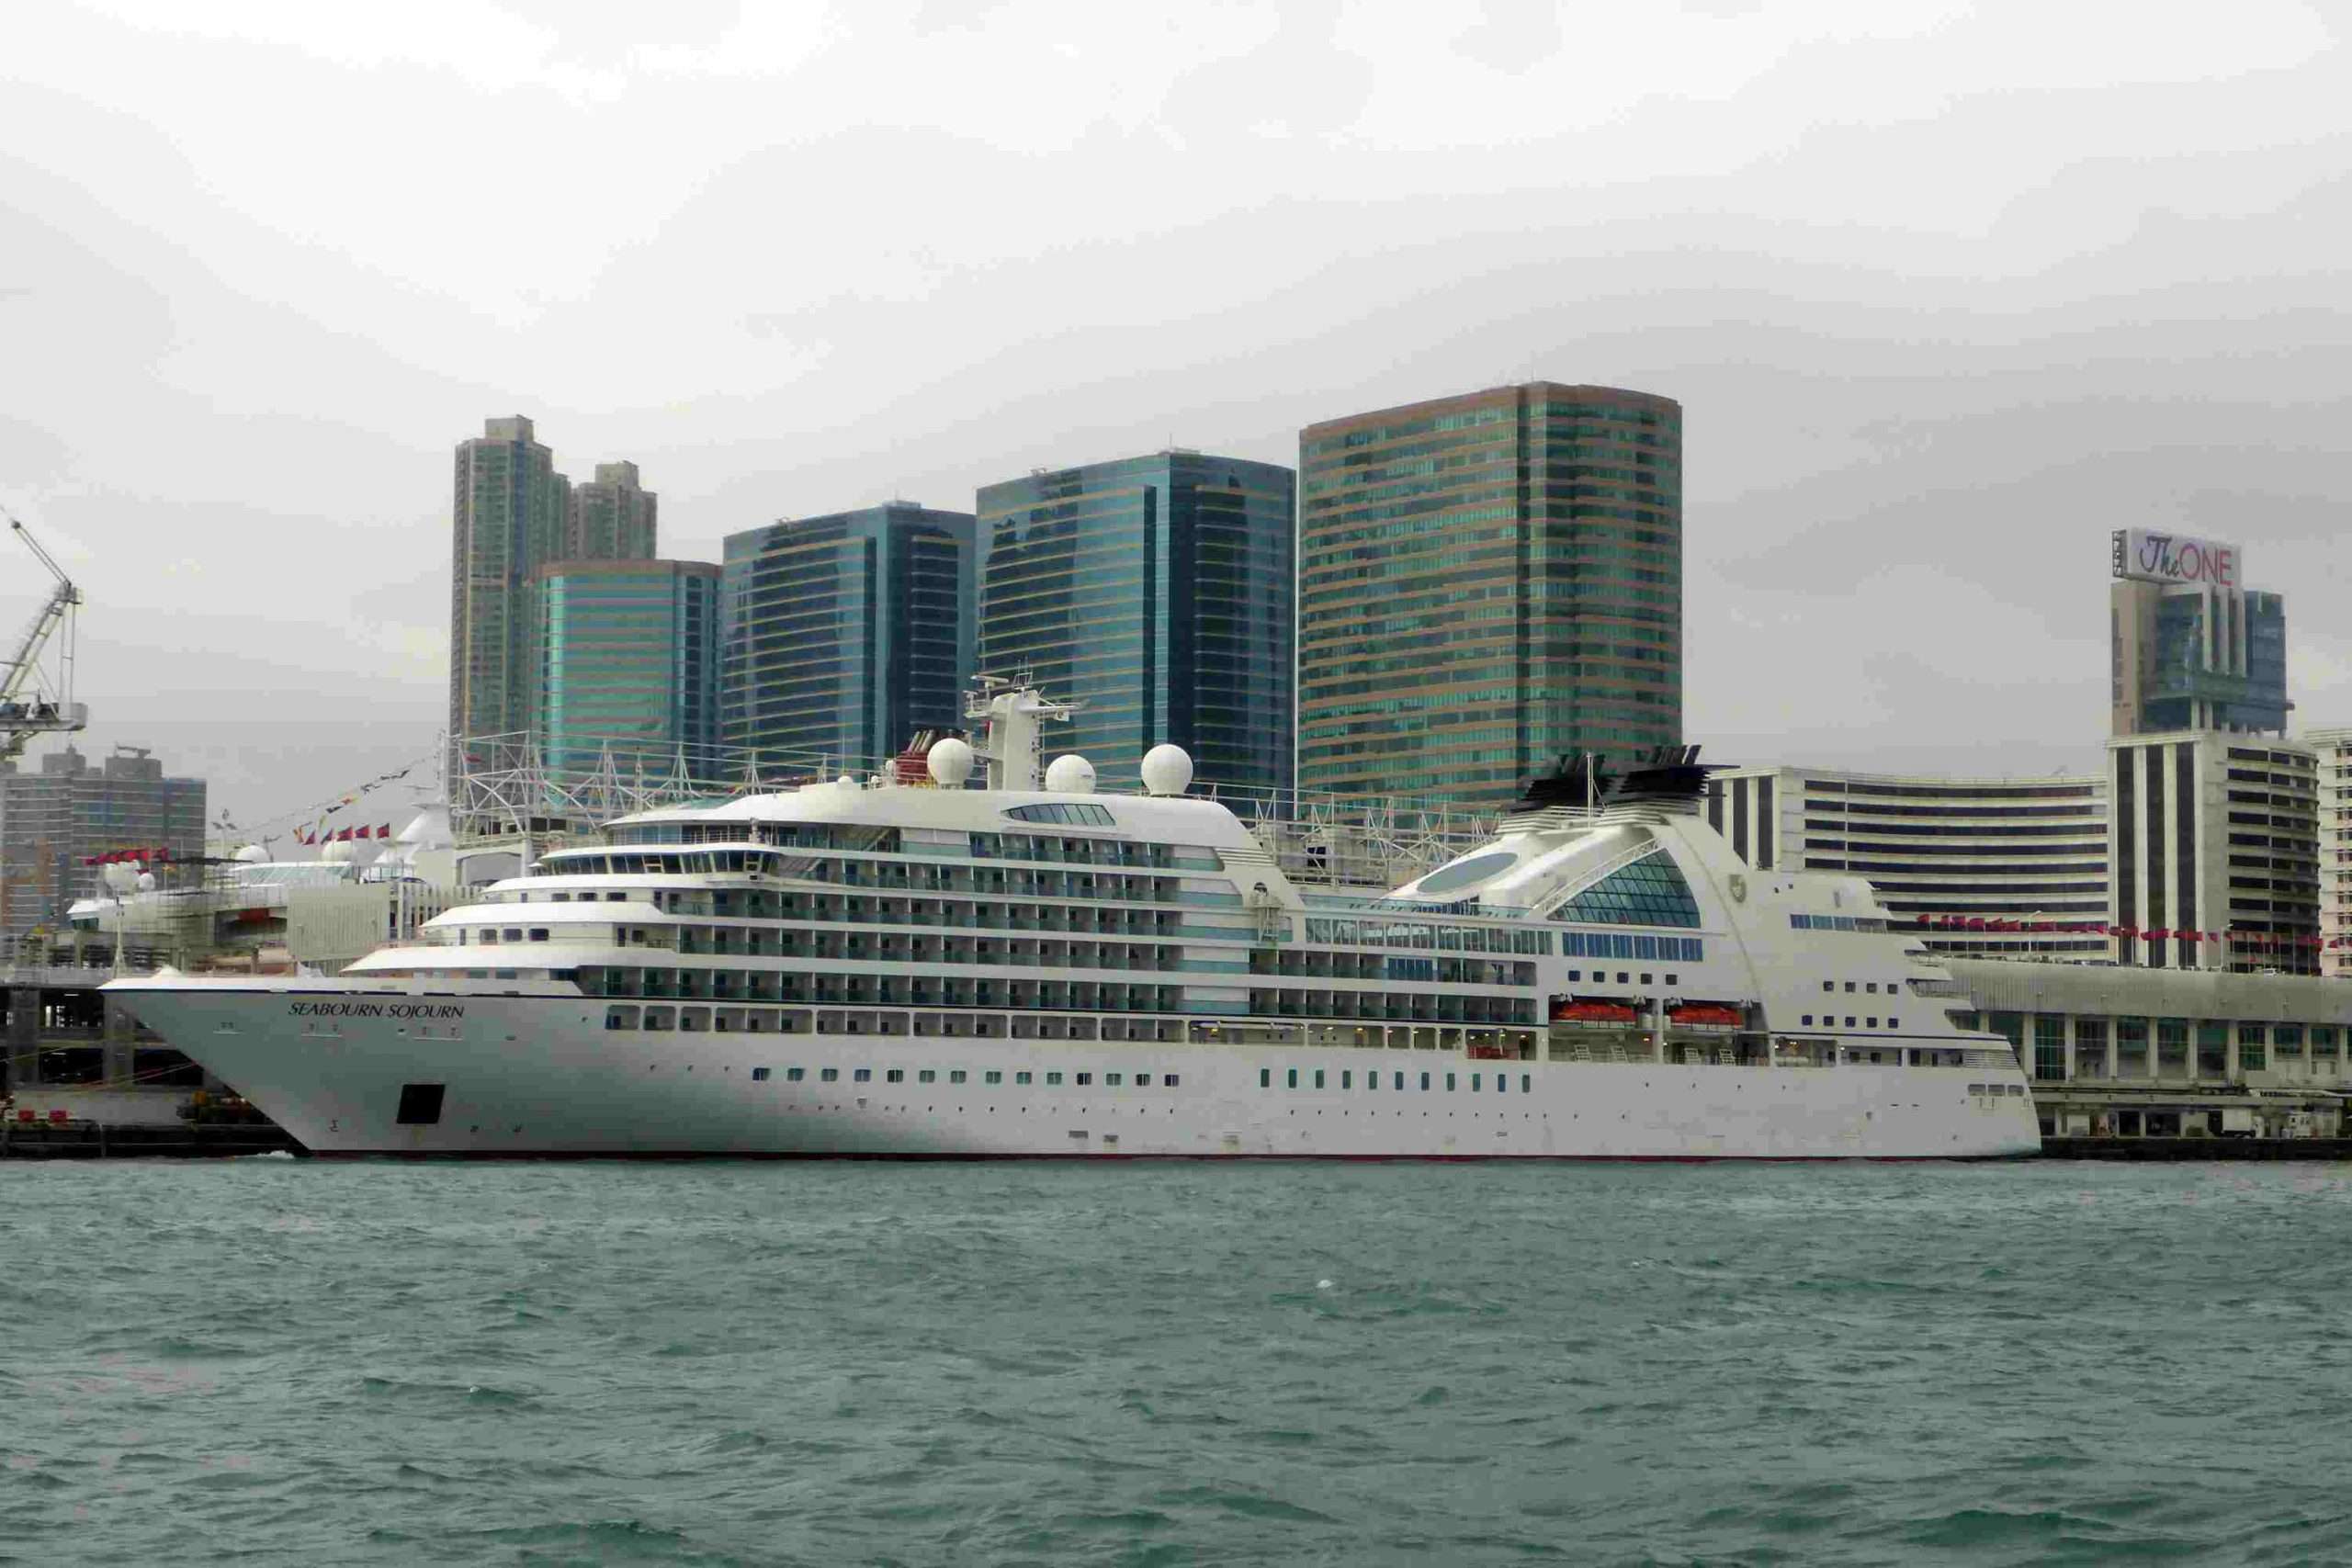 Seabourn Sojourn Cruise Ship Profile and Photo Tour